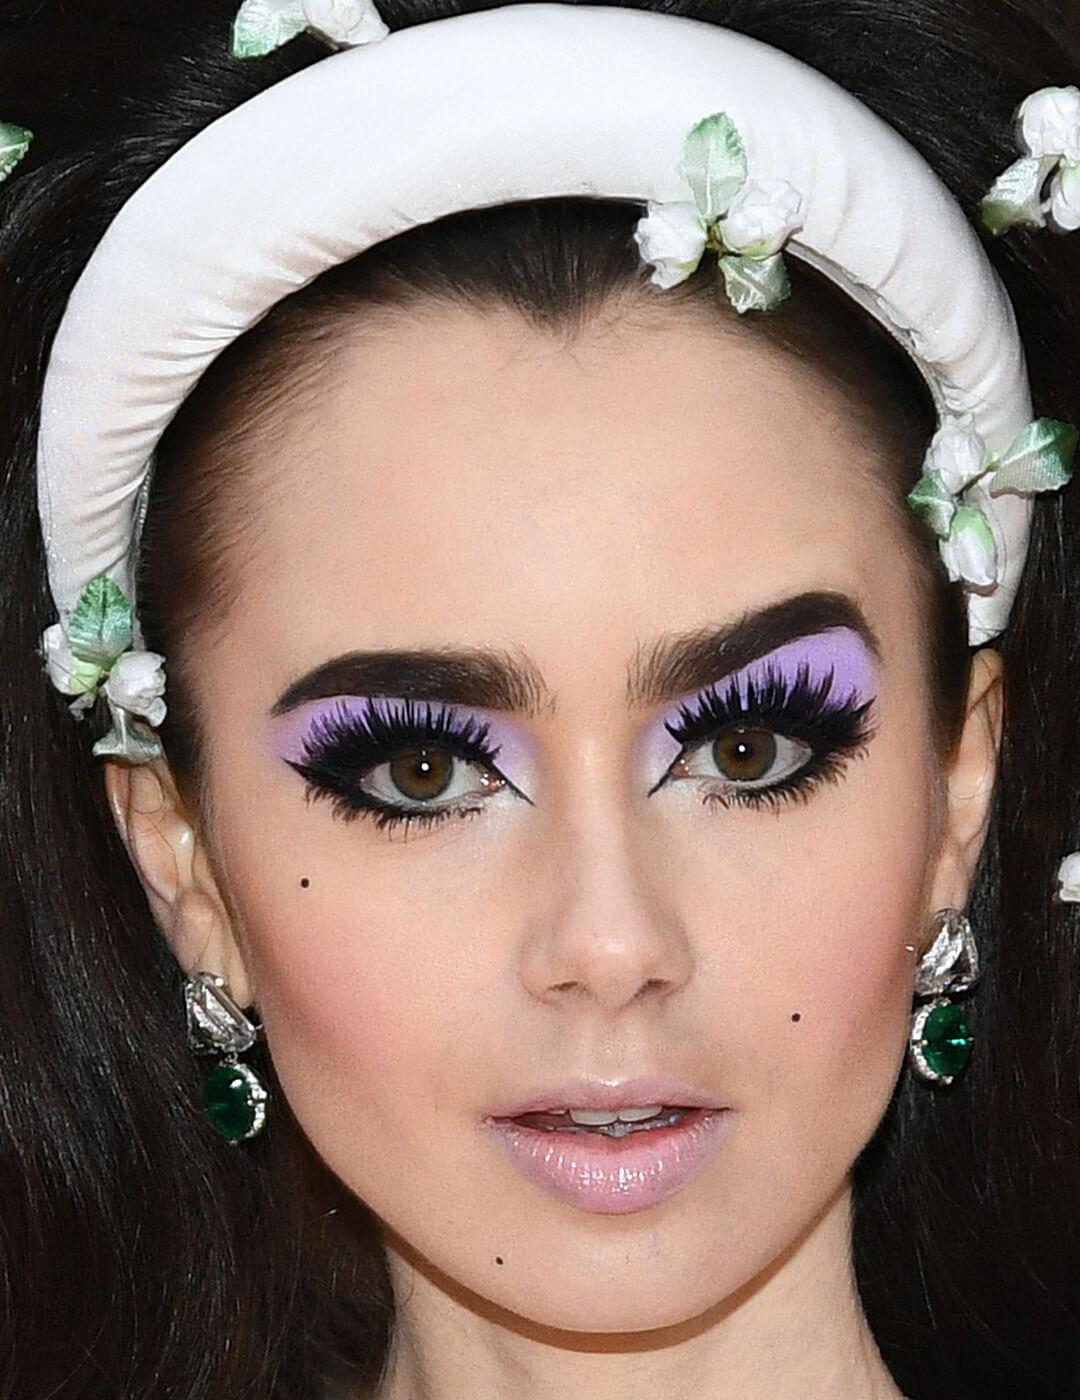 Lily Collins looking retro in a purple eyeshadow makeup look, glossy and frosty nude lips, and white headband with flowers